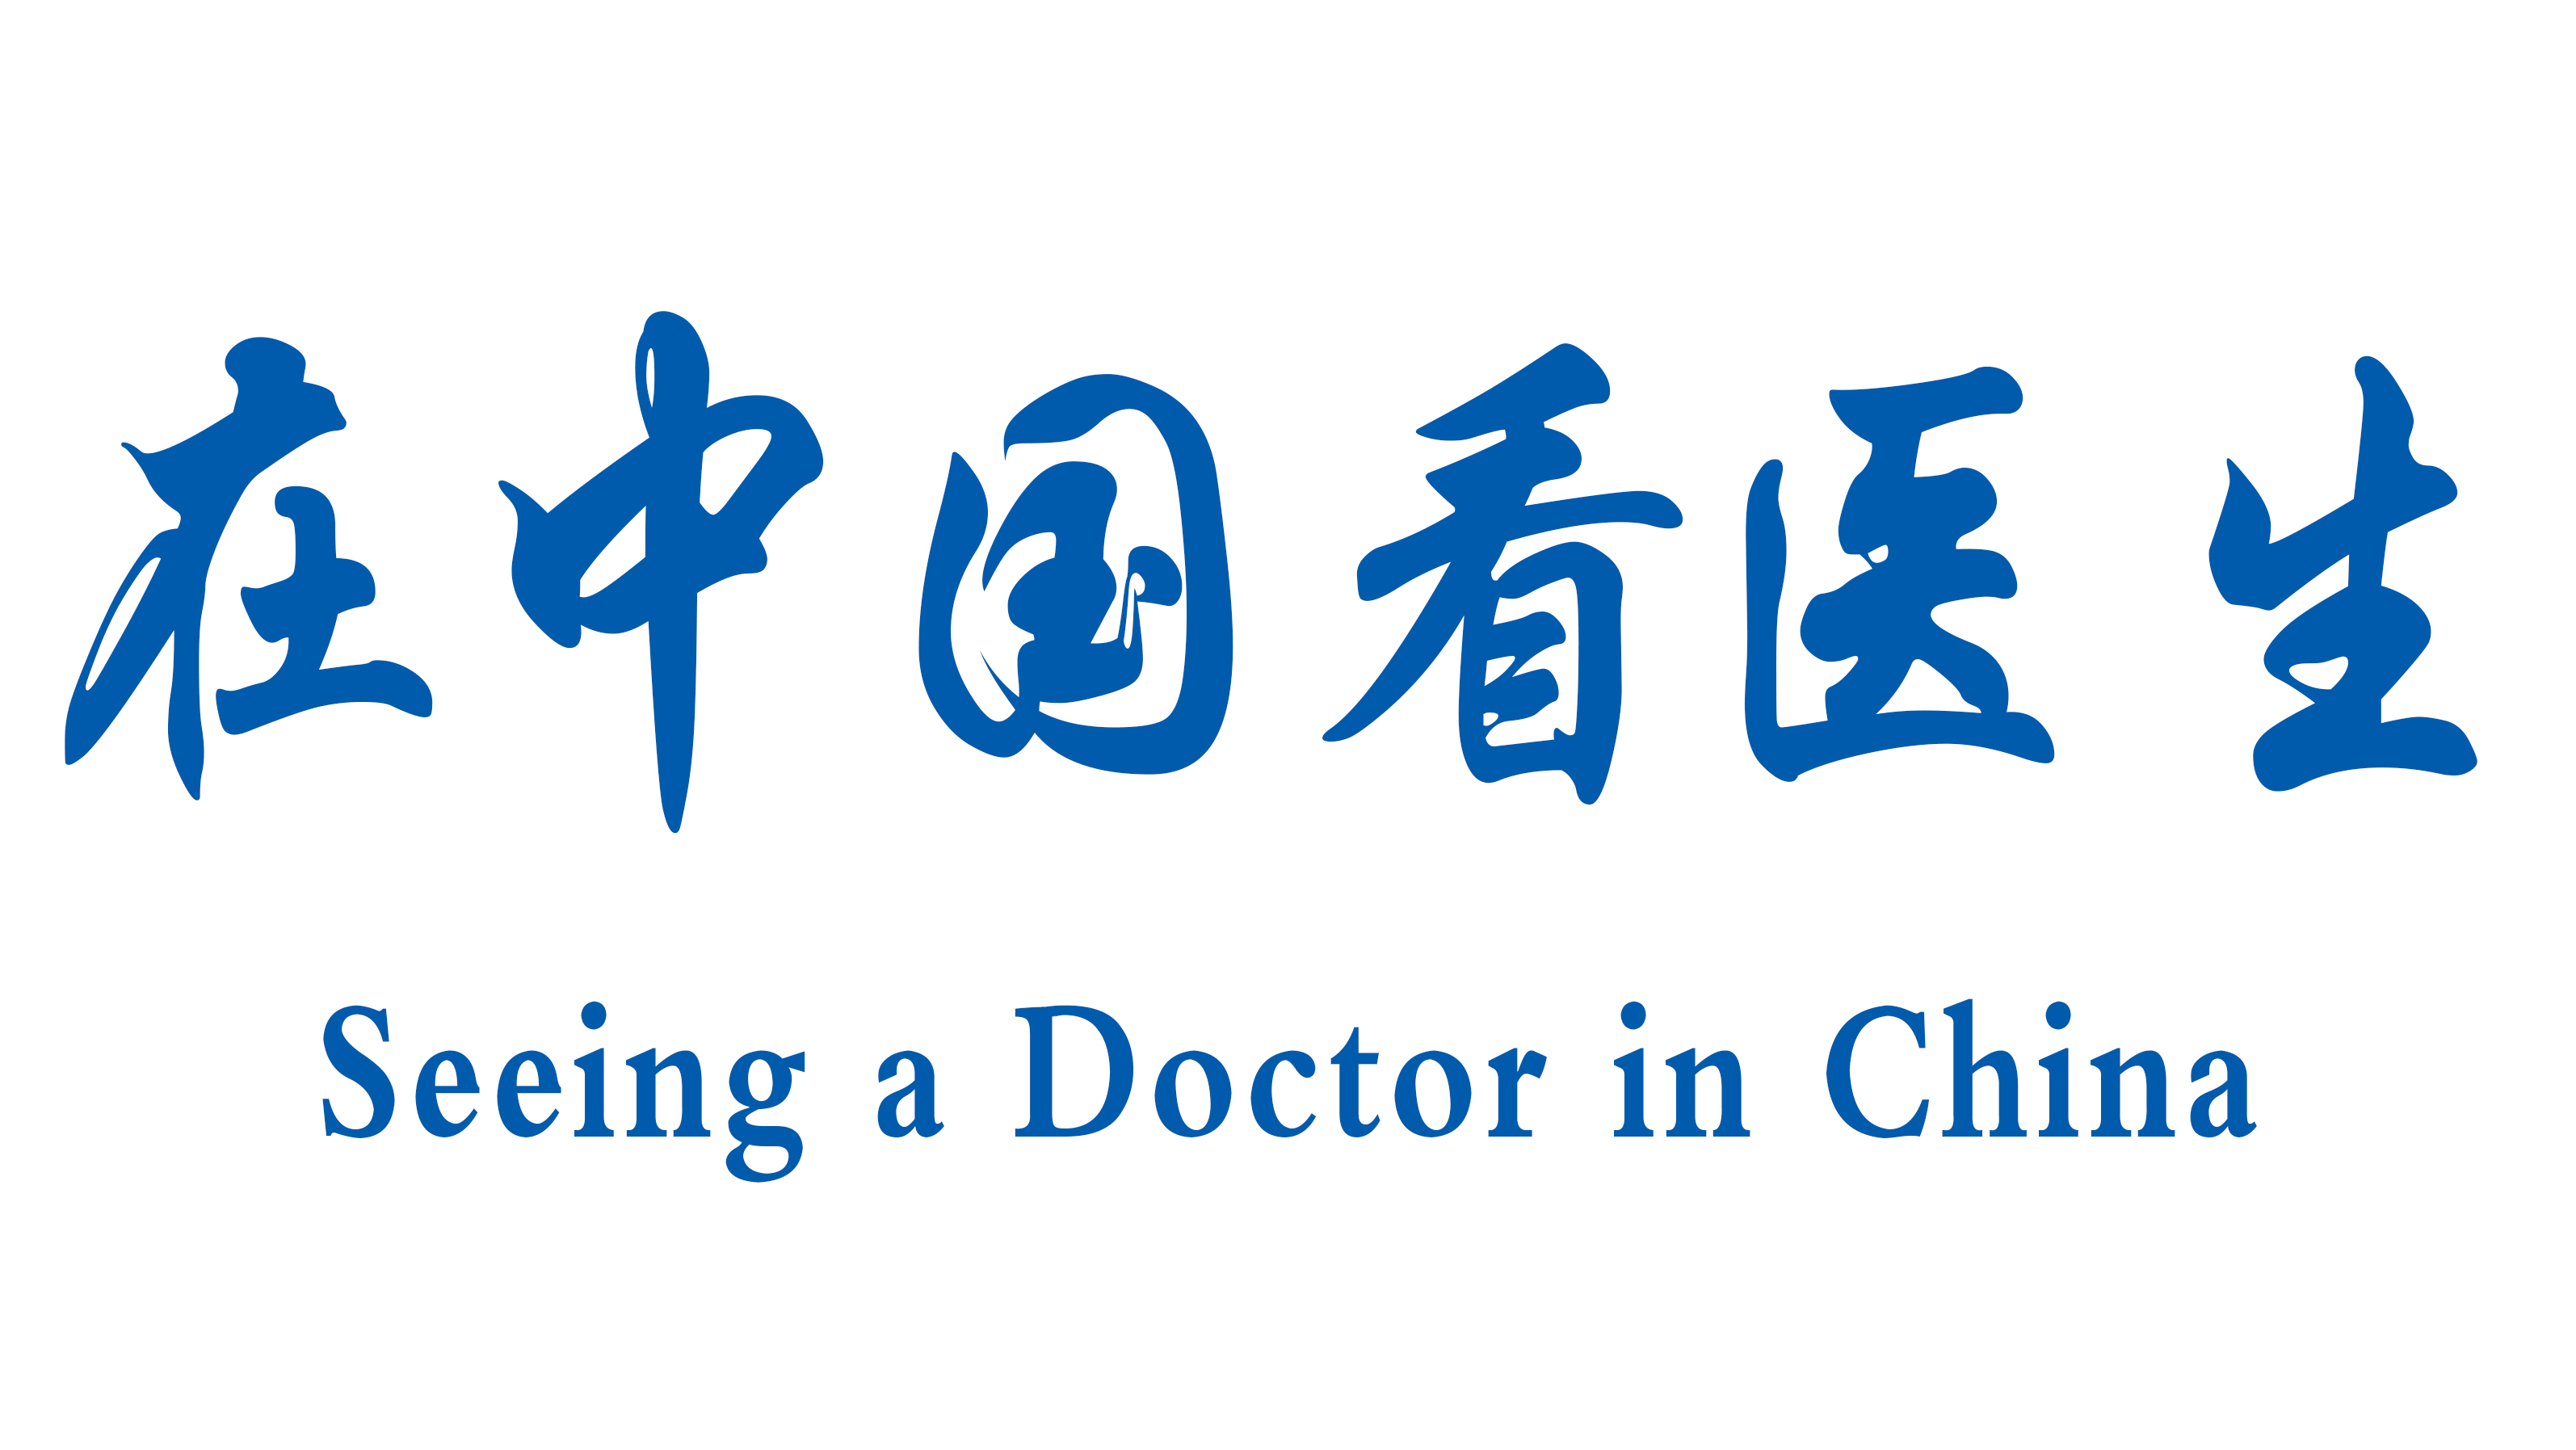 Seeing a Doctor in China